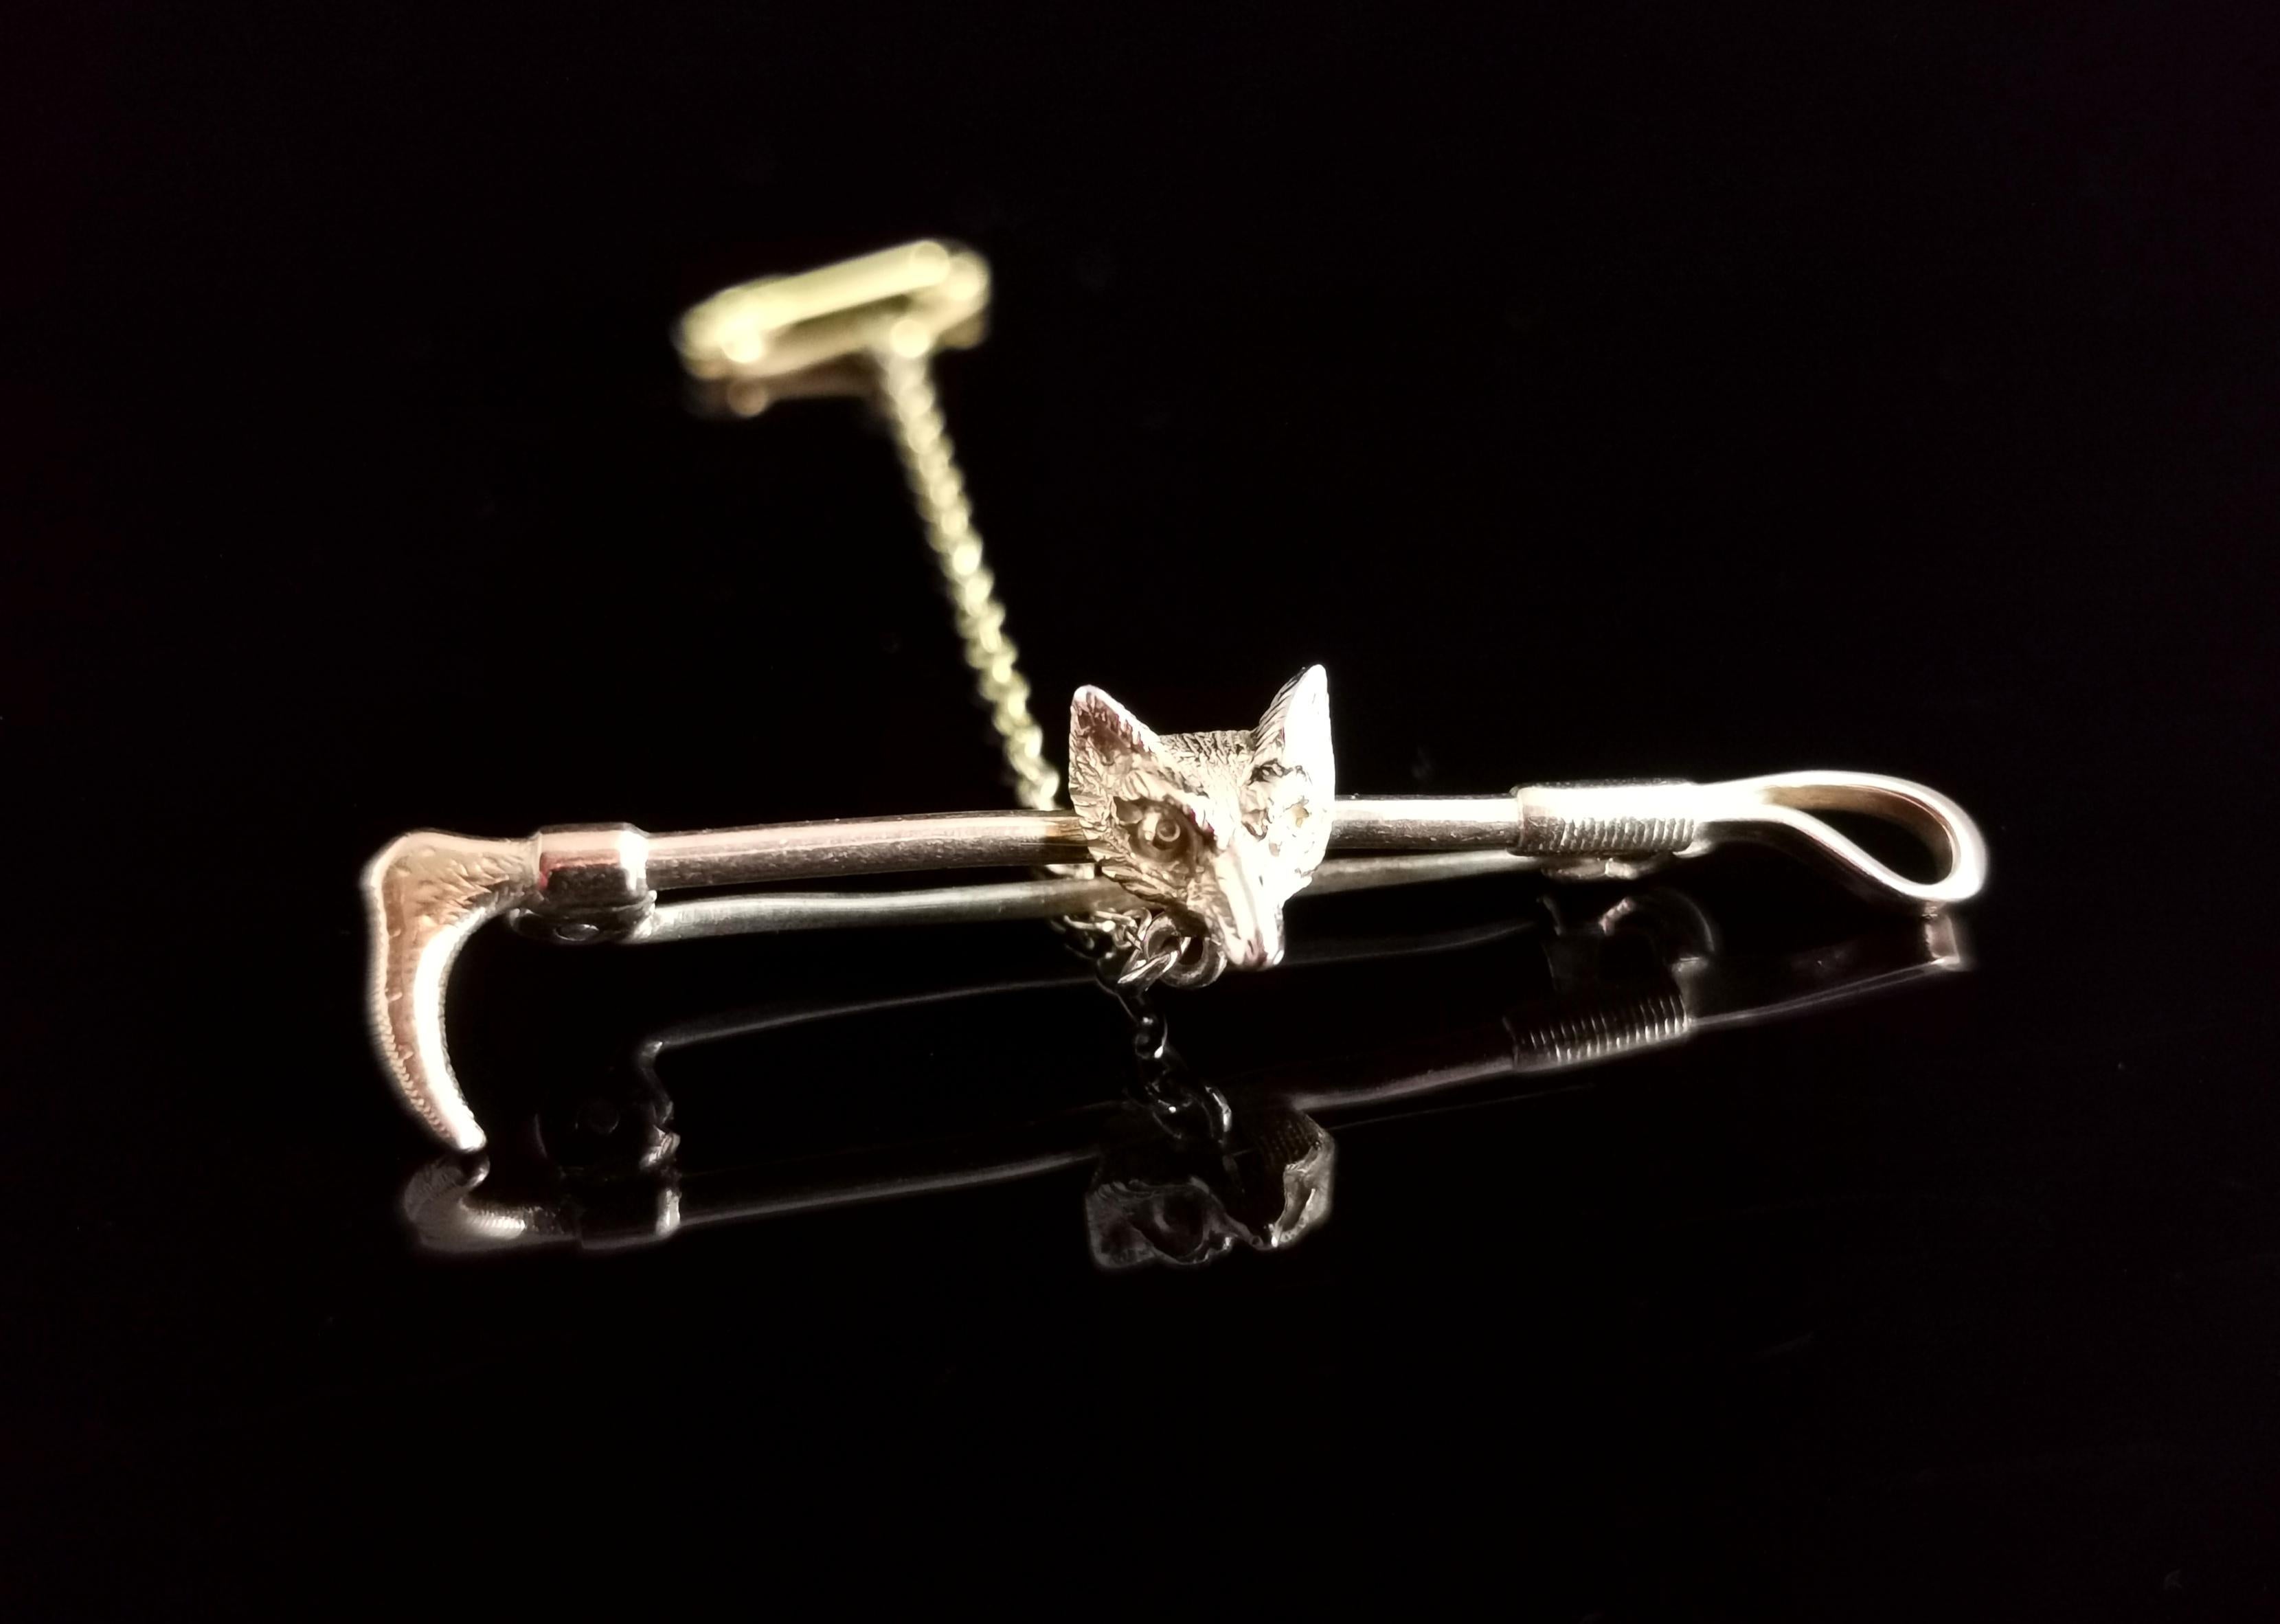 A well detailed antique 9ct gold fox and riding crop brooch or pin.

It has subtle bi colour gold highlights with some yellow and some rosey gold areas.

The brooch features a fox head to the centre which is realistically textured, mounted onto a